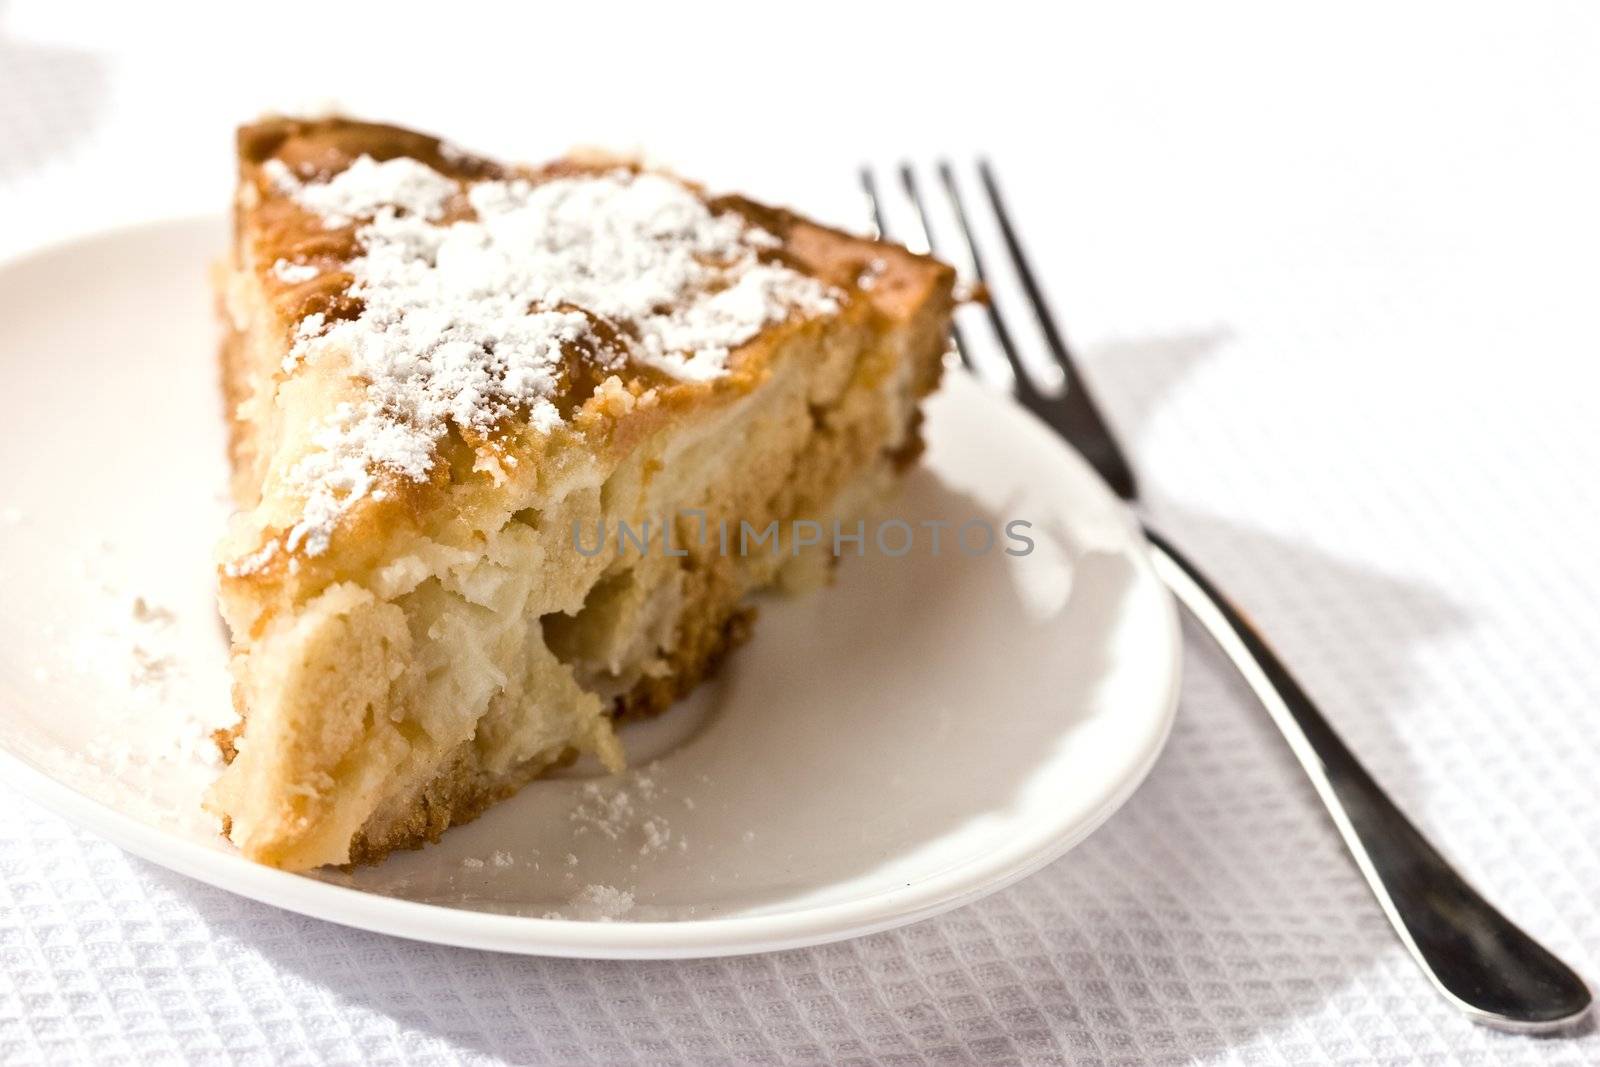 food serias: apple-pie on the plate with icing sugar